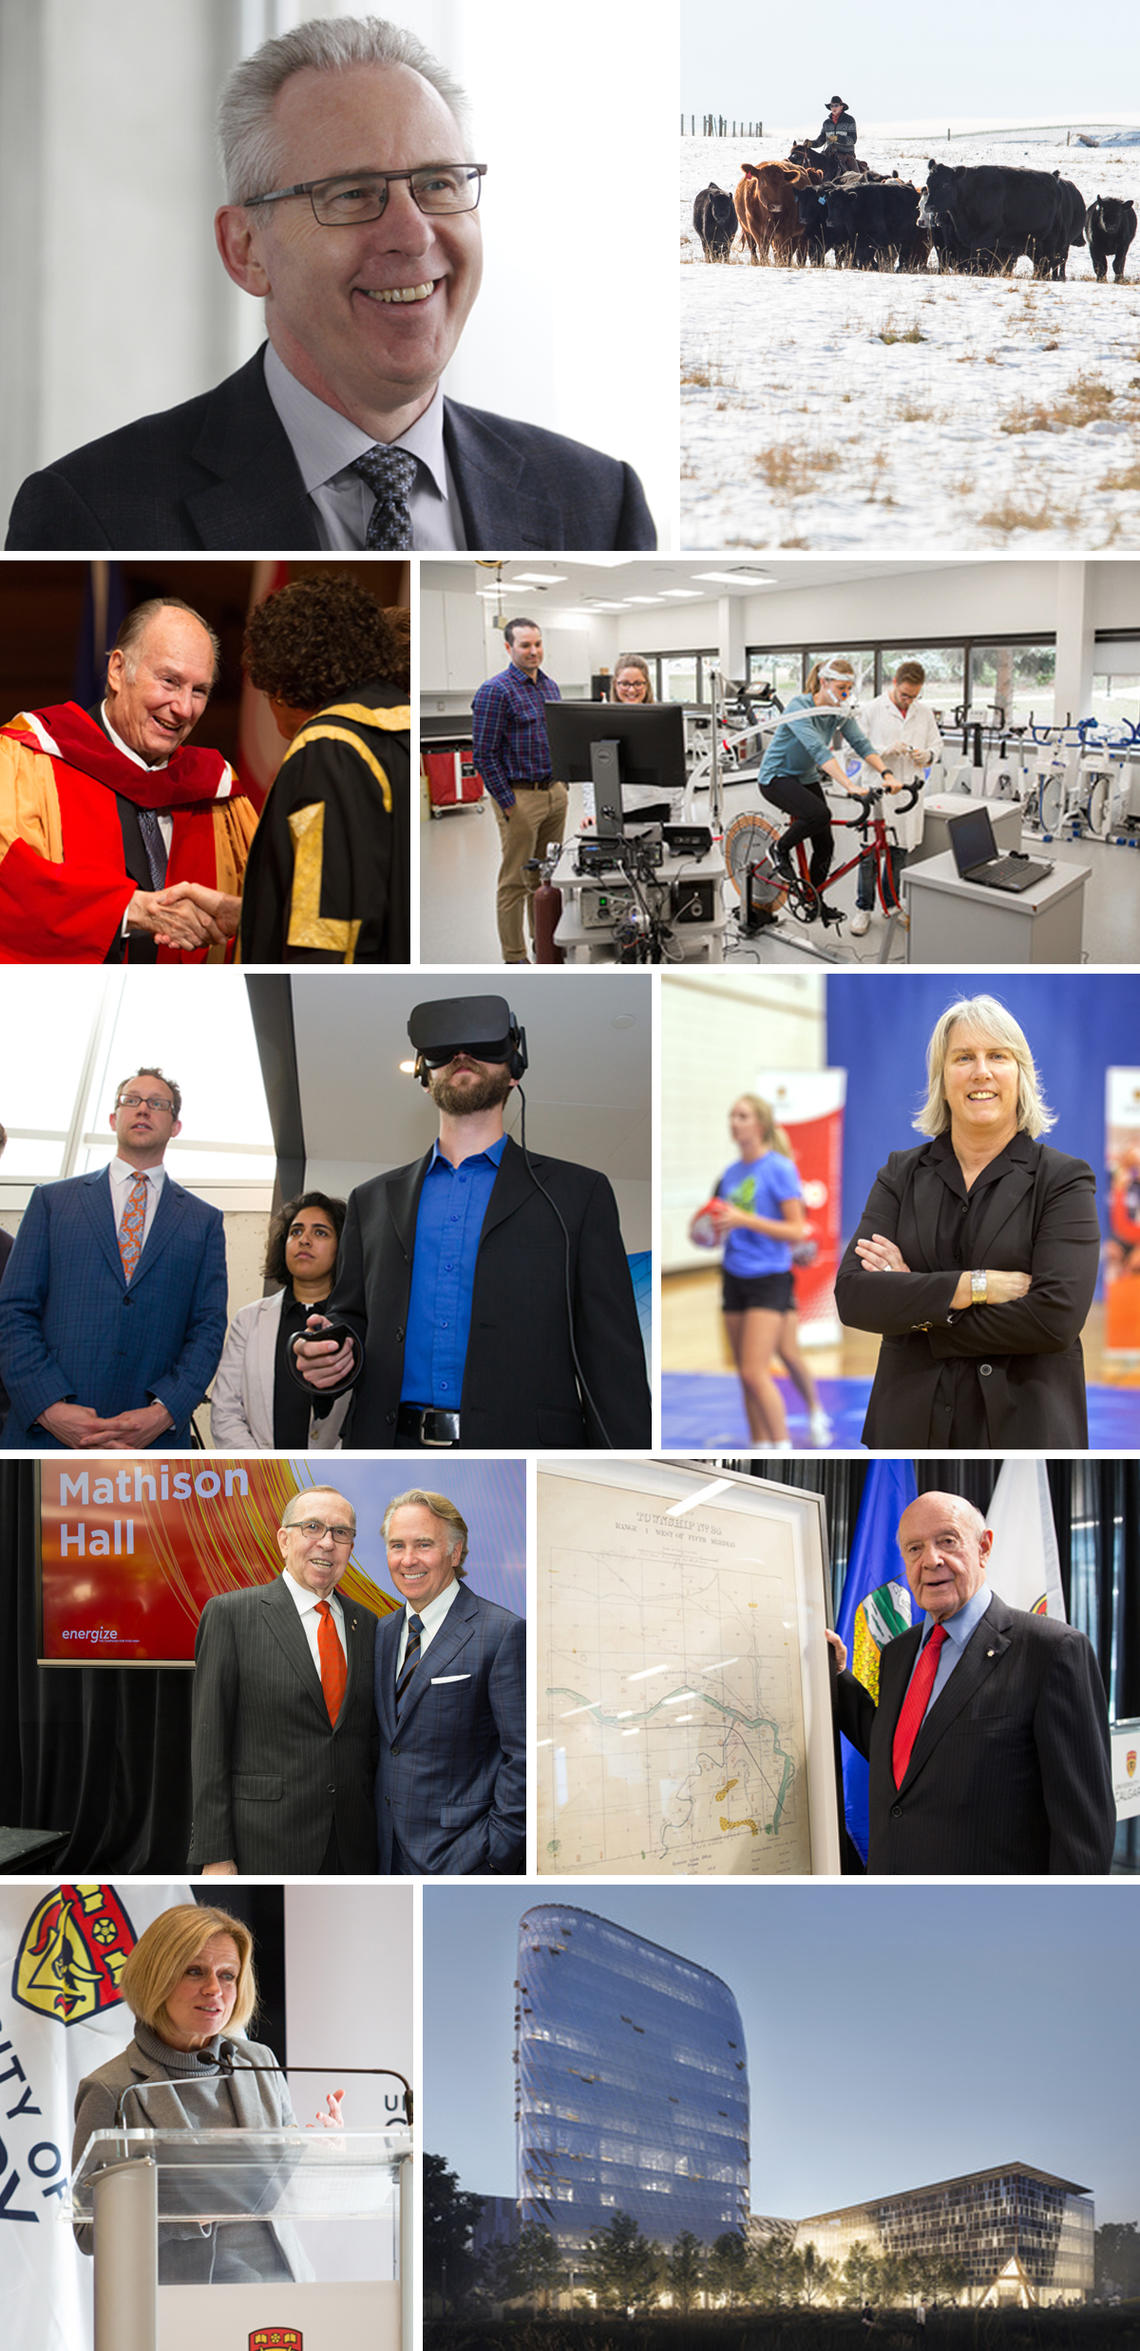 Clockwise from top left: Ed McCauley, ninth president of the University of Calgary; Anderson-Chisholm family gifts a working ranch to the Faculty of Veterinary Medicine; Faculty of Kinesiology ranks No. 1 among North American sport science schools; Carolyn Emery will lead a concussion research program at Canadian high schools; donation from Bill Siebens and family supports the historic relocation of the Glenbow Library and Archives to the university; construction begins on the MacKimmie redevelopment; Premi